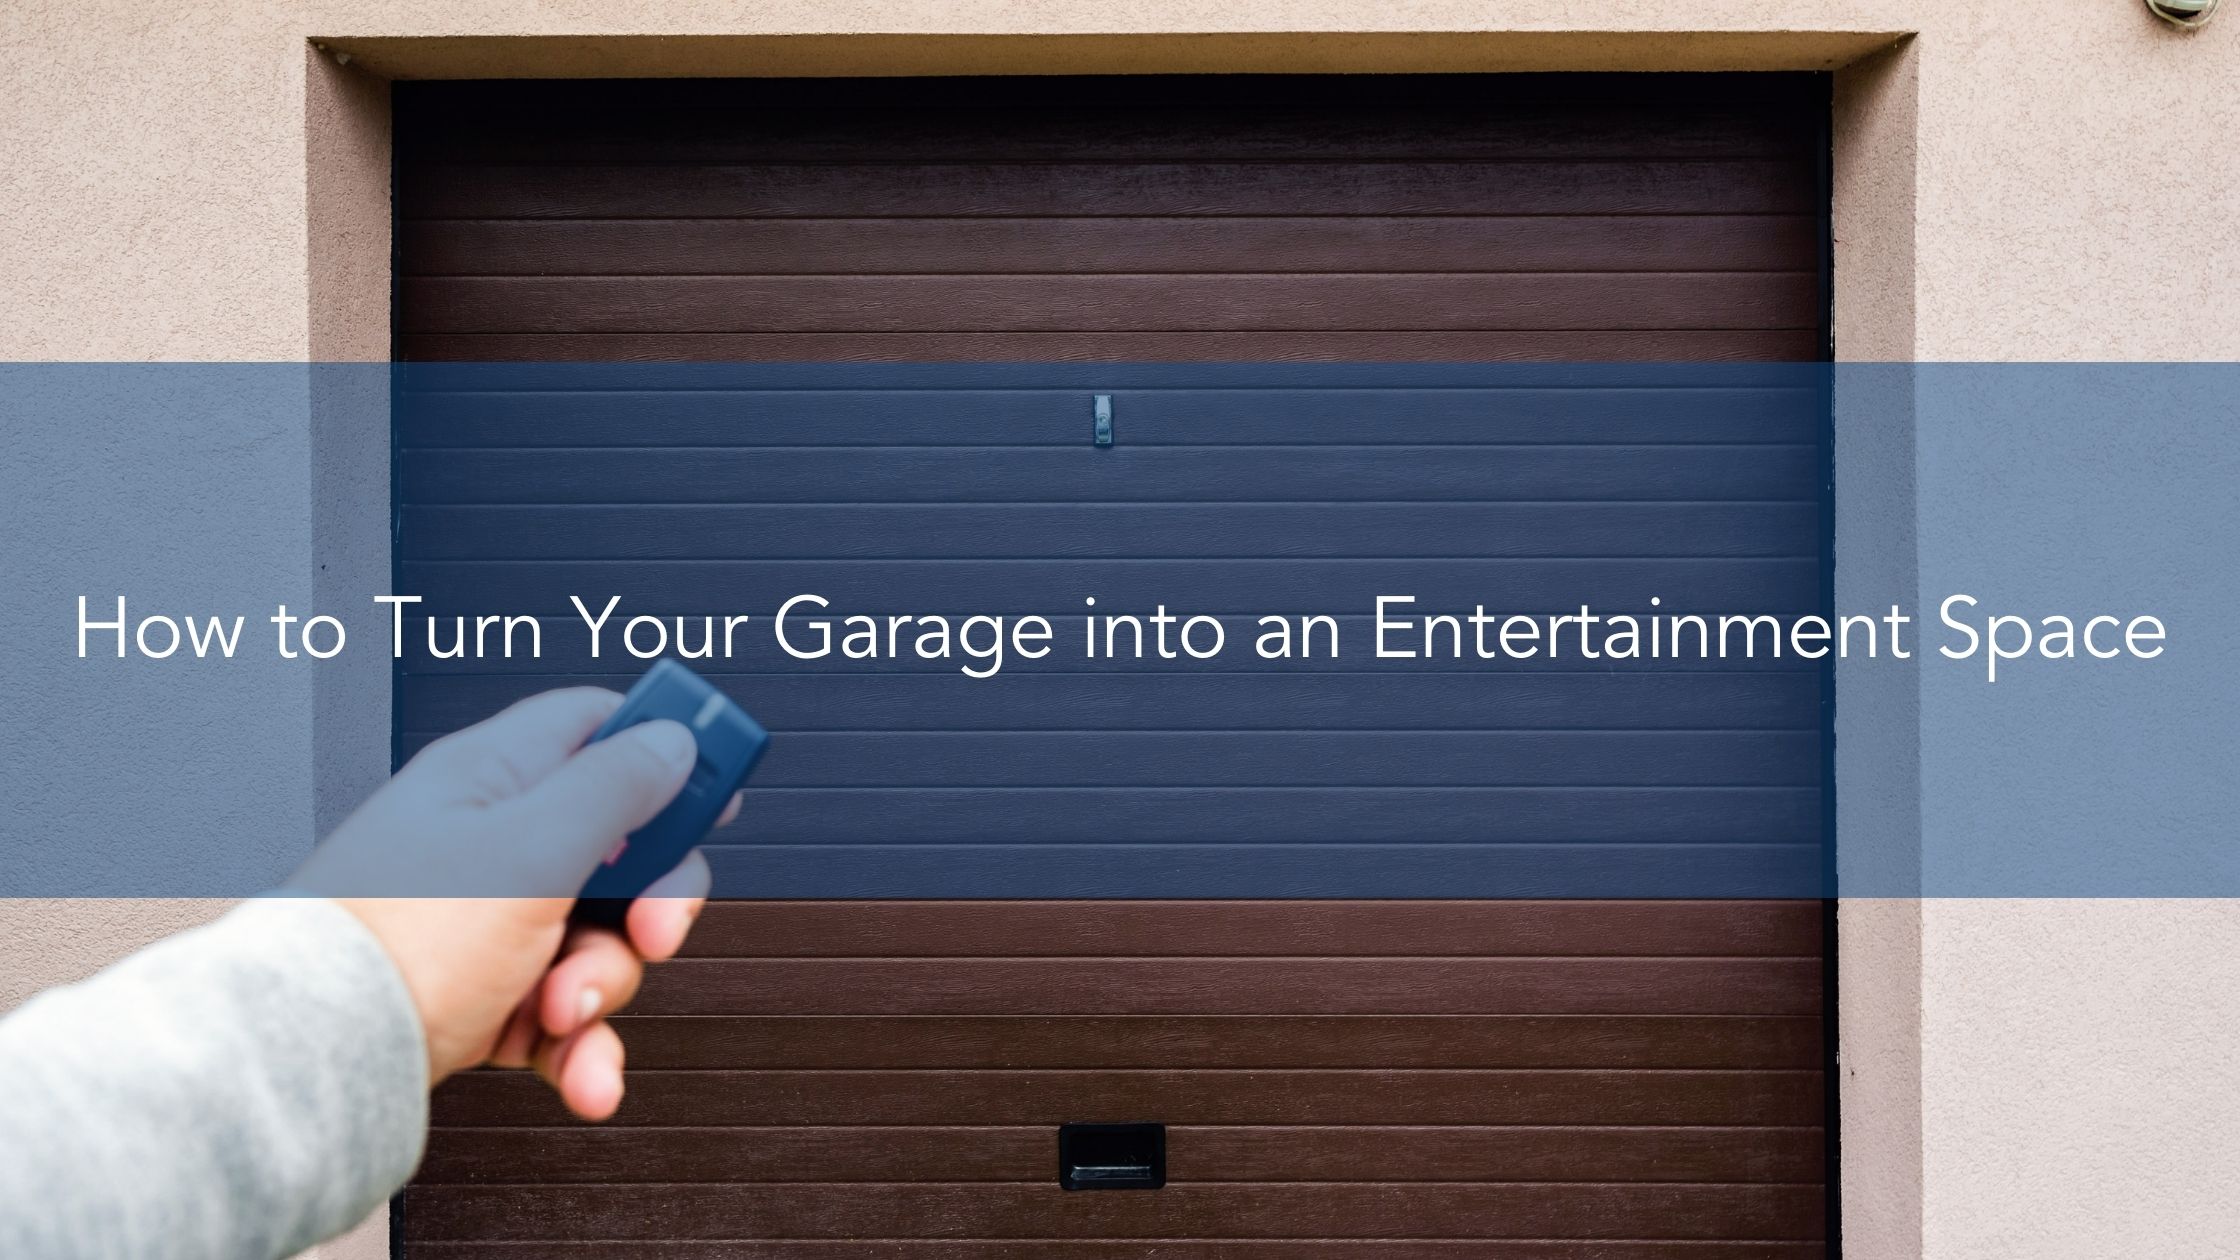 https://雷竞技下载链接官网appwww.explorizers.com/wp-content/uploads/2022/07/How-to-Turn-Your-Garage-into-an-Entertainment-Space.jpg